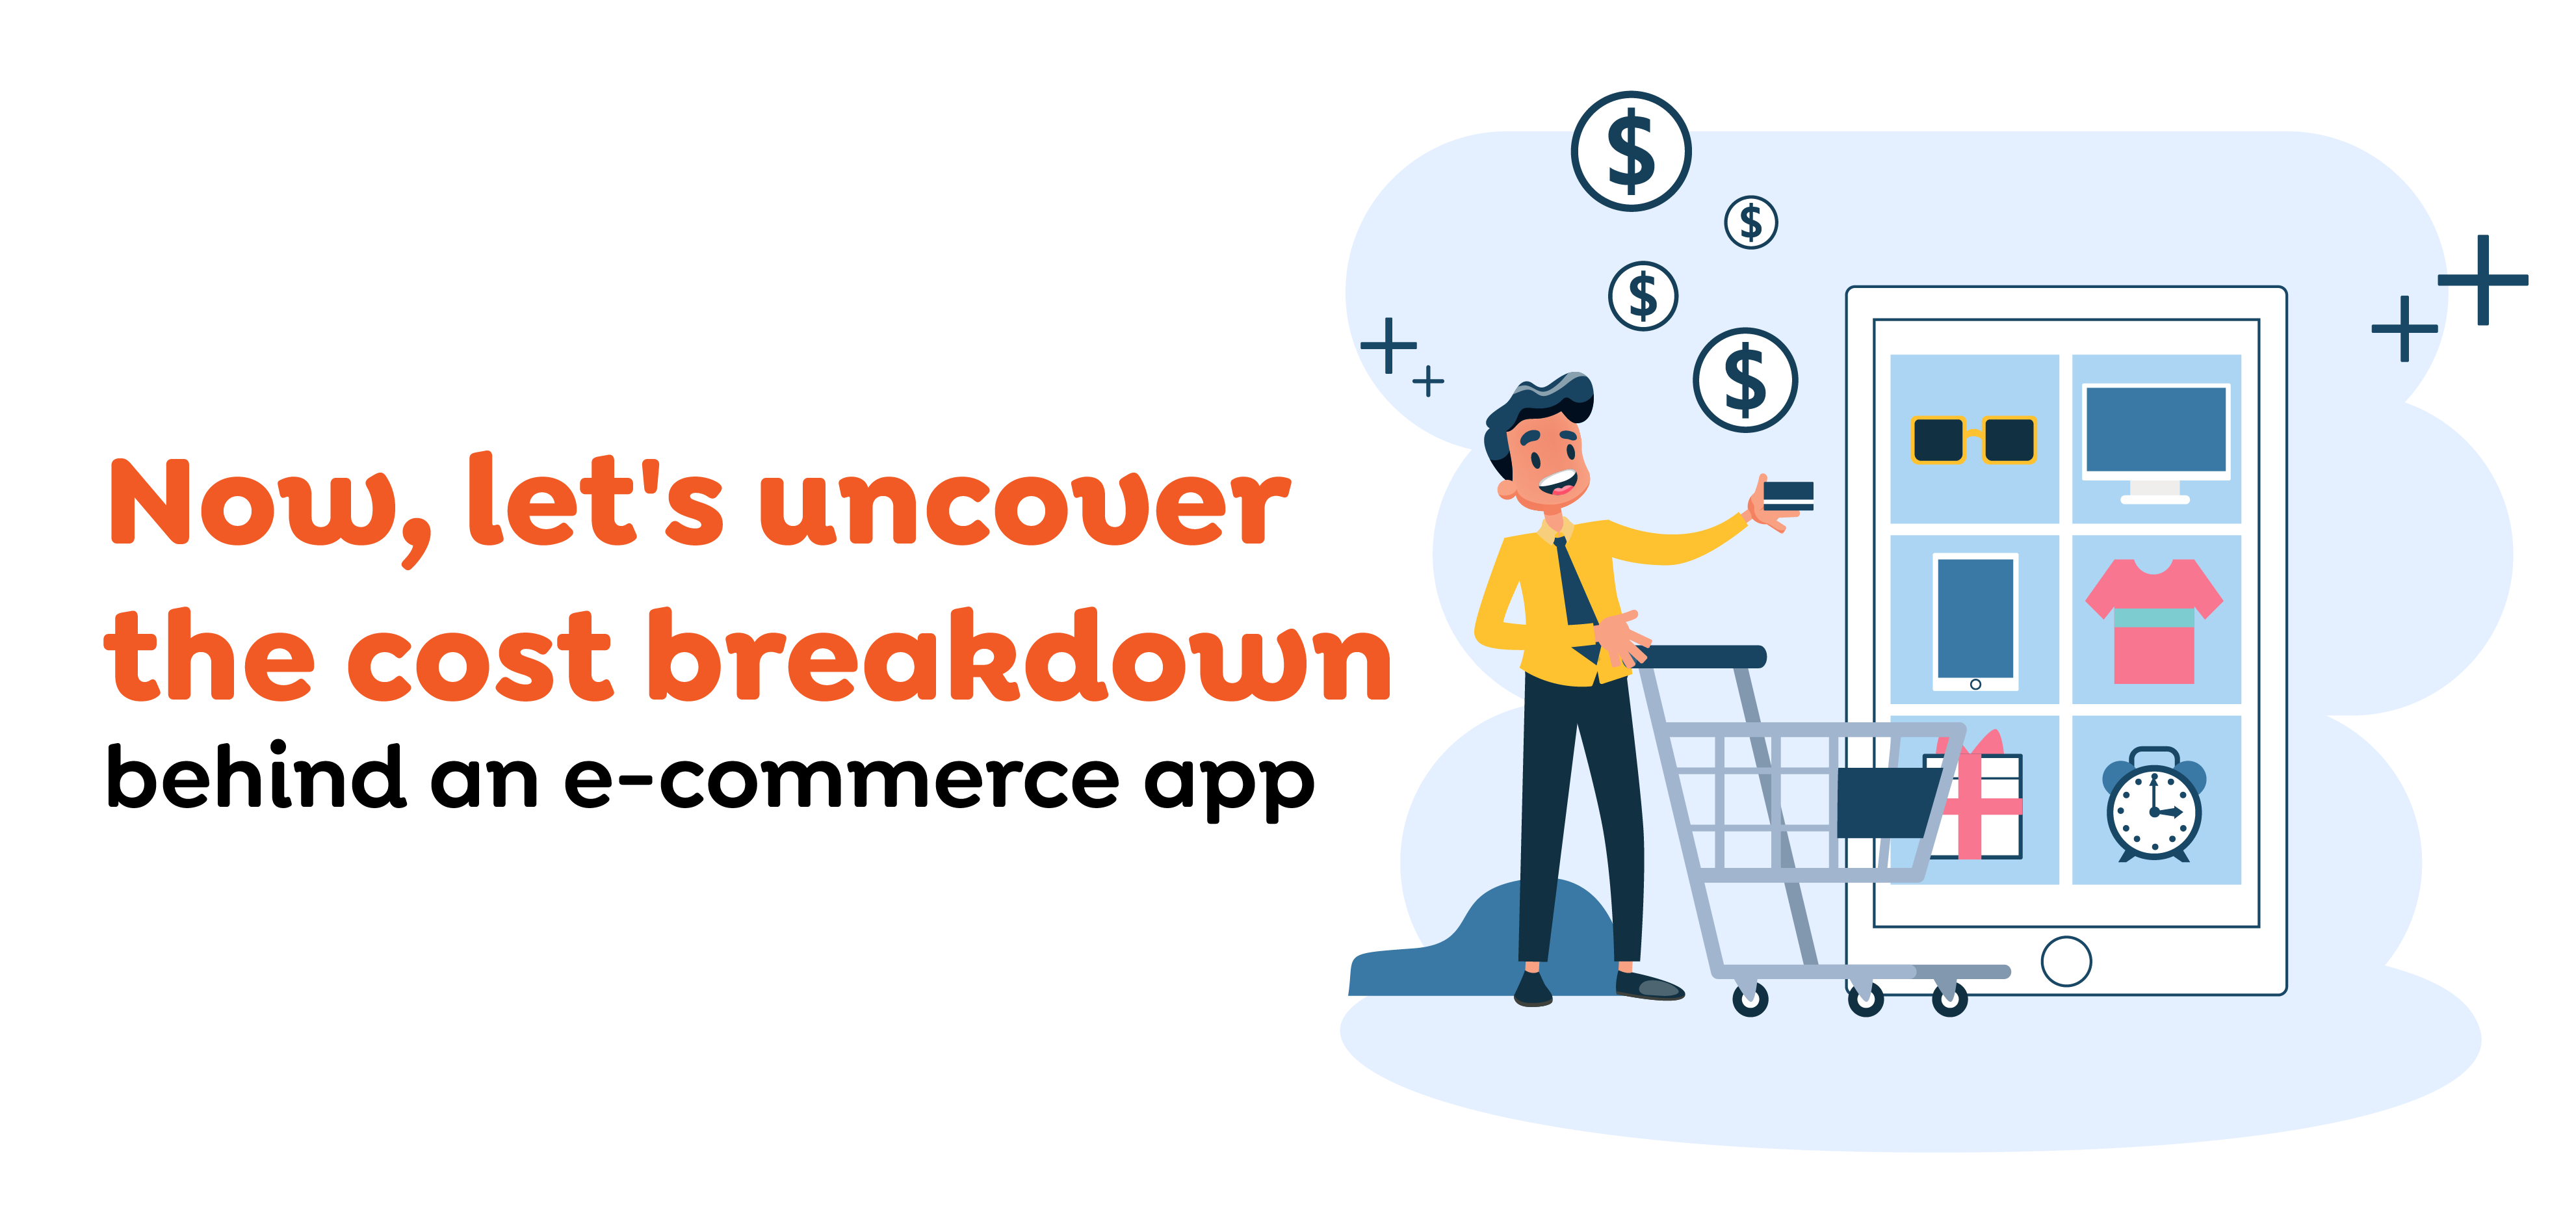 Now, let's uncover the cost breakdown behind an e-commerce app